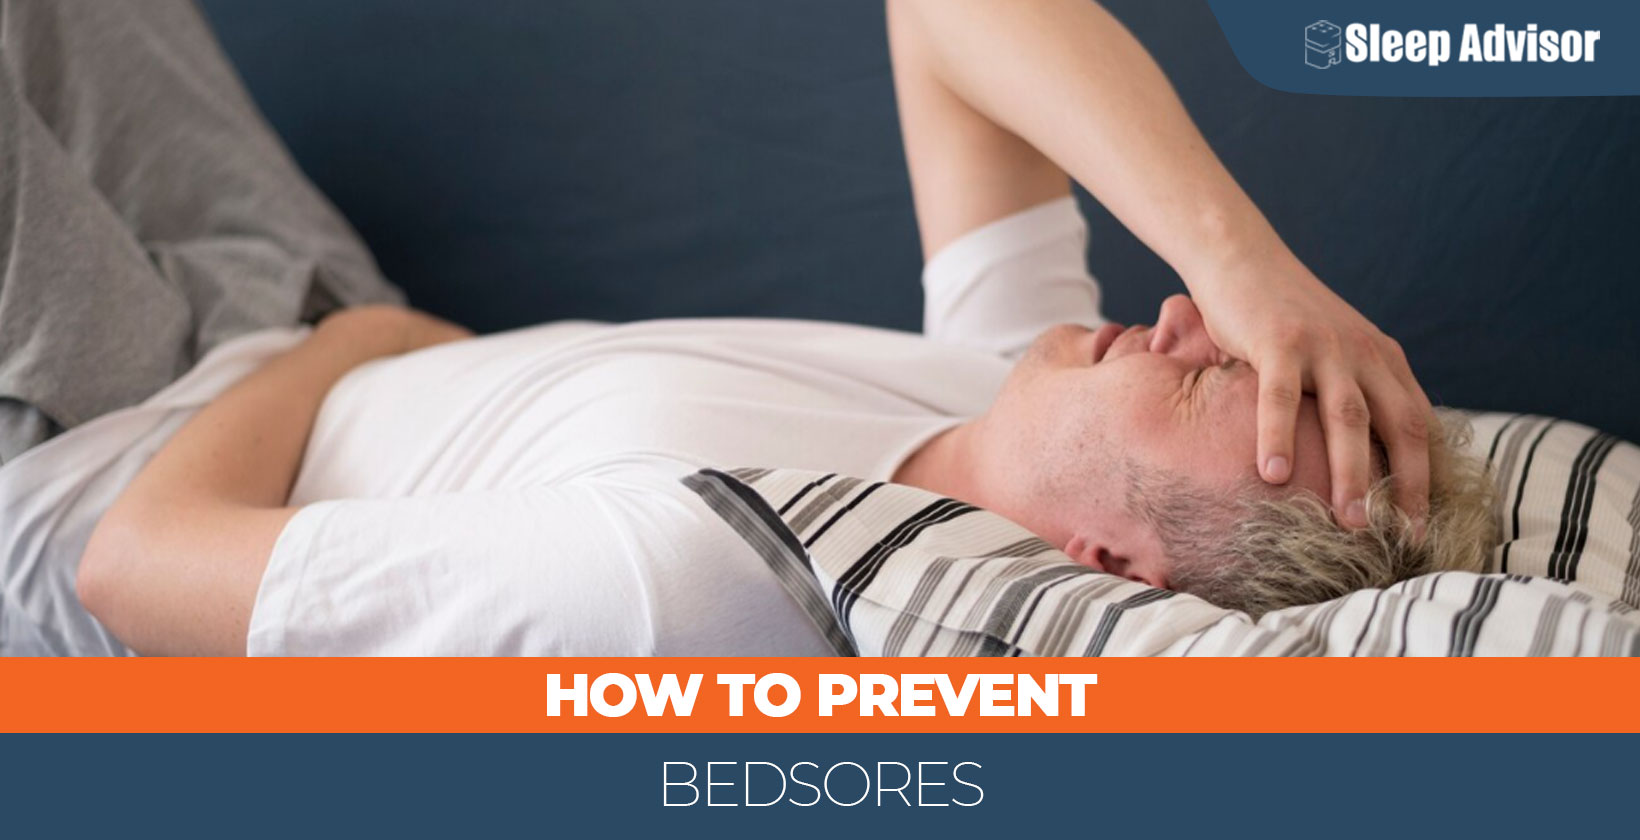 How to Prevent Bedsores (Pressure Ulcers)